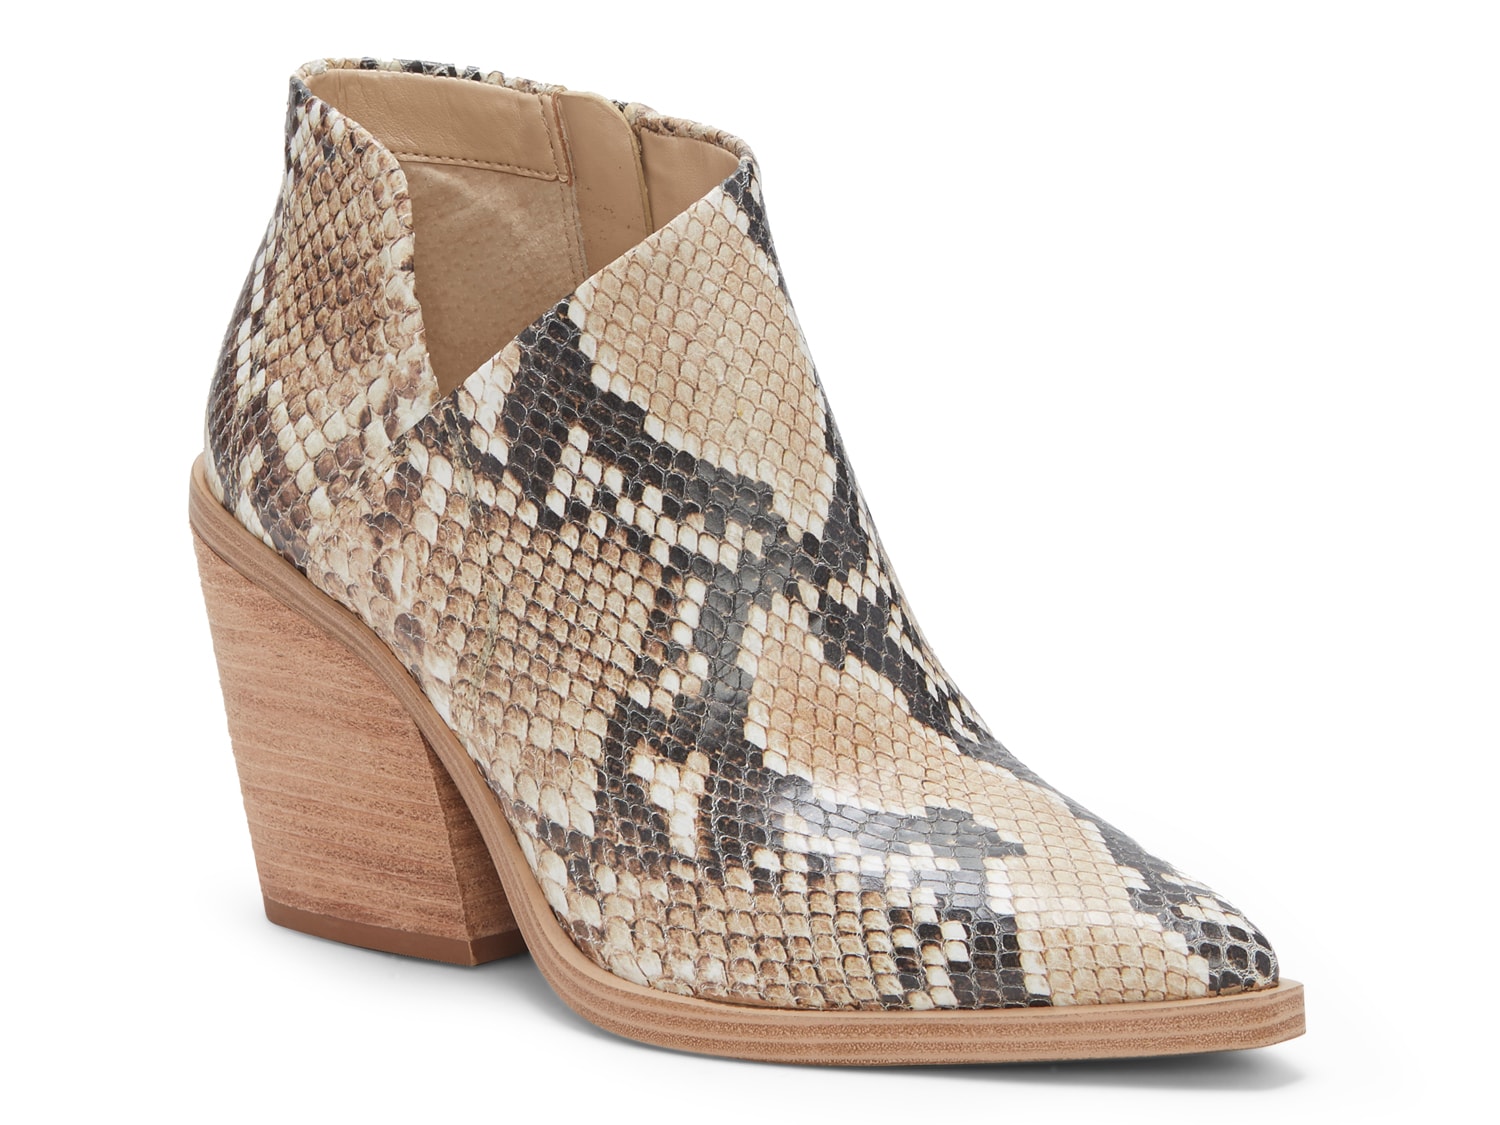 Vince Camuto Grendan Bootie - Free Shipping | DSW